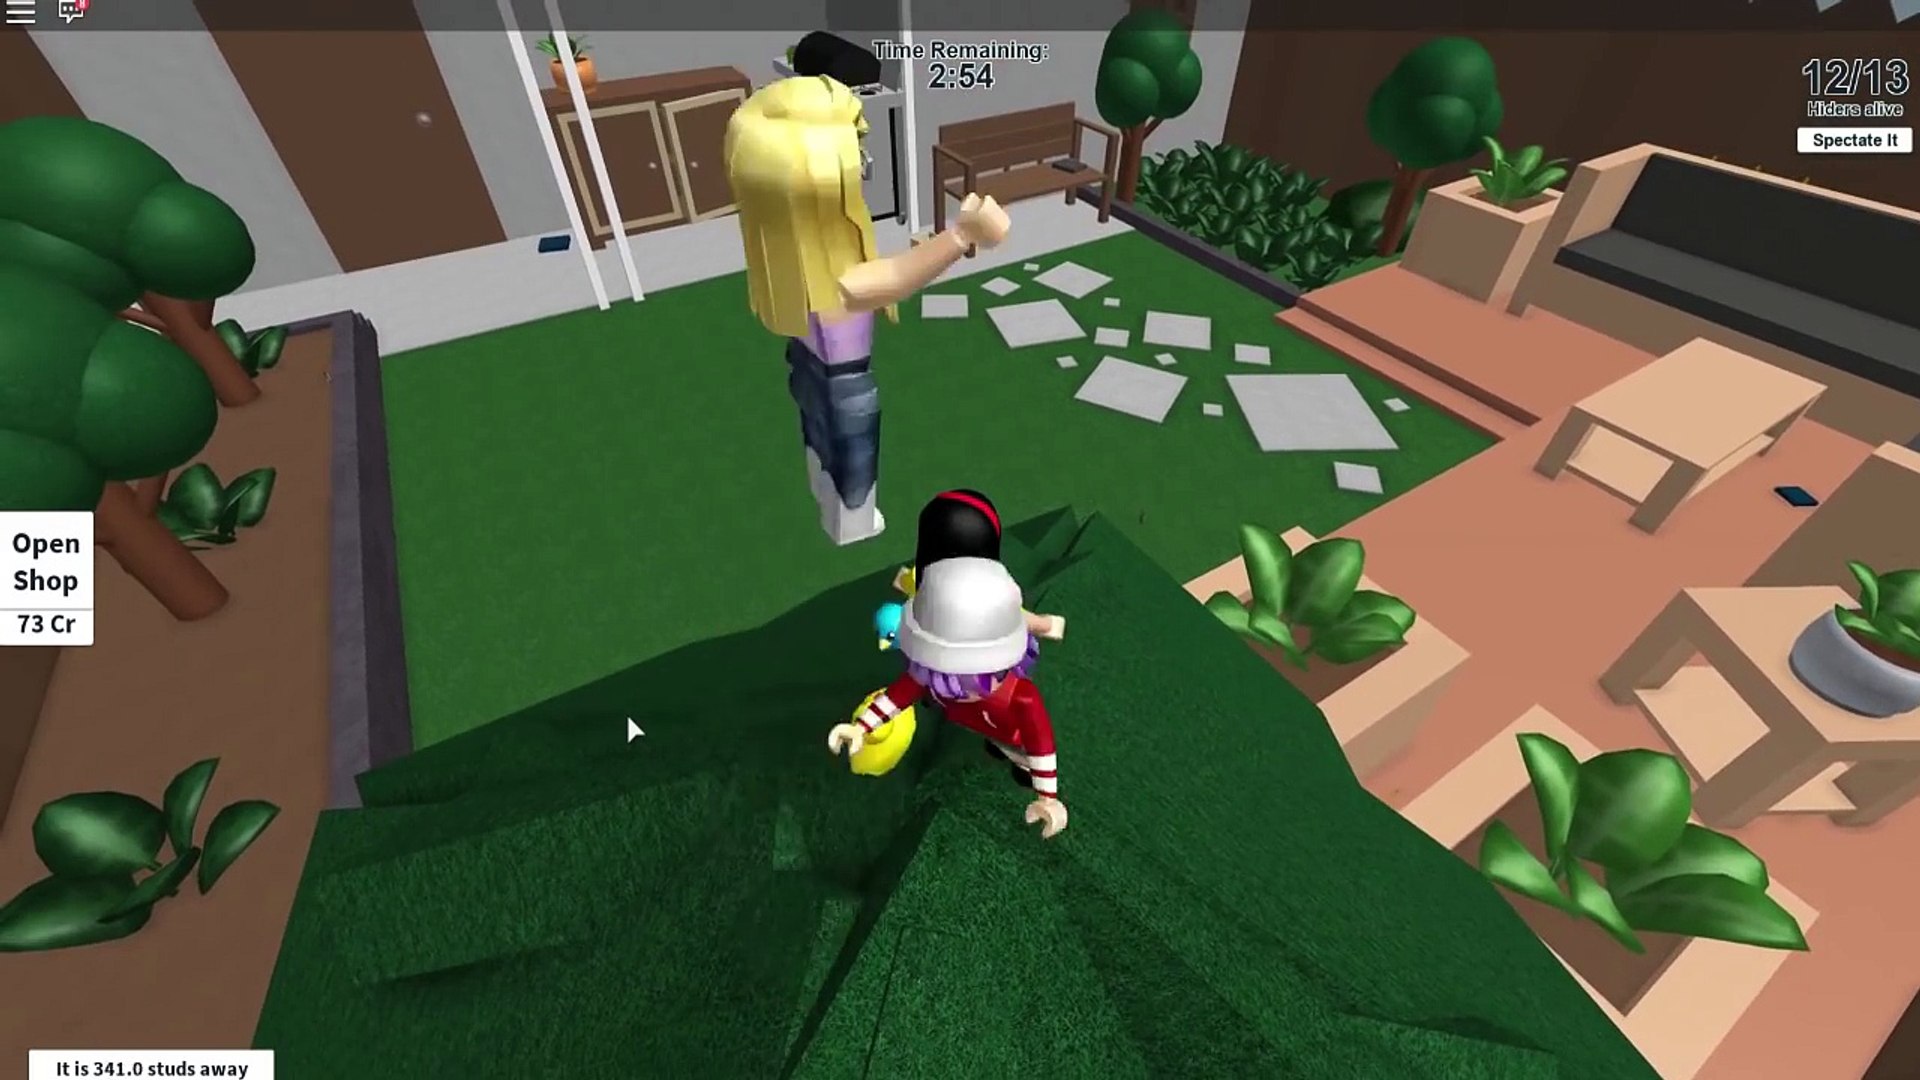 Roblox Extreme Hide And Seek Audrey Knows All The Secret Spots With Radiojh Games Au Dailymotion Video